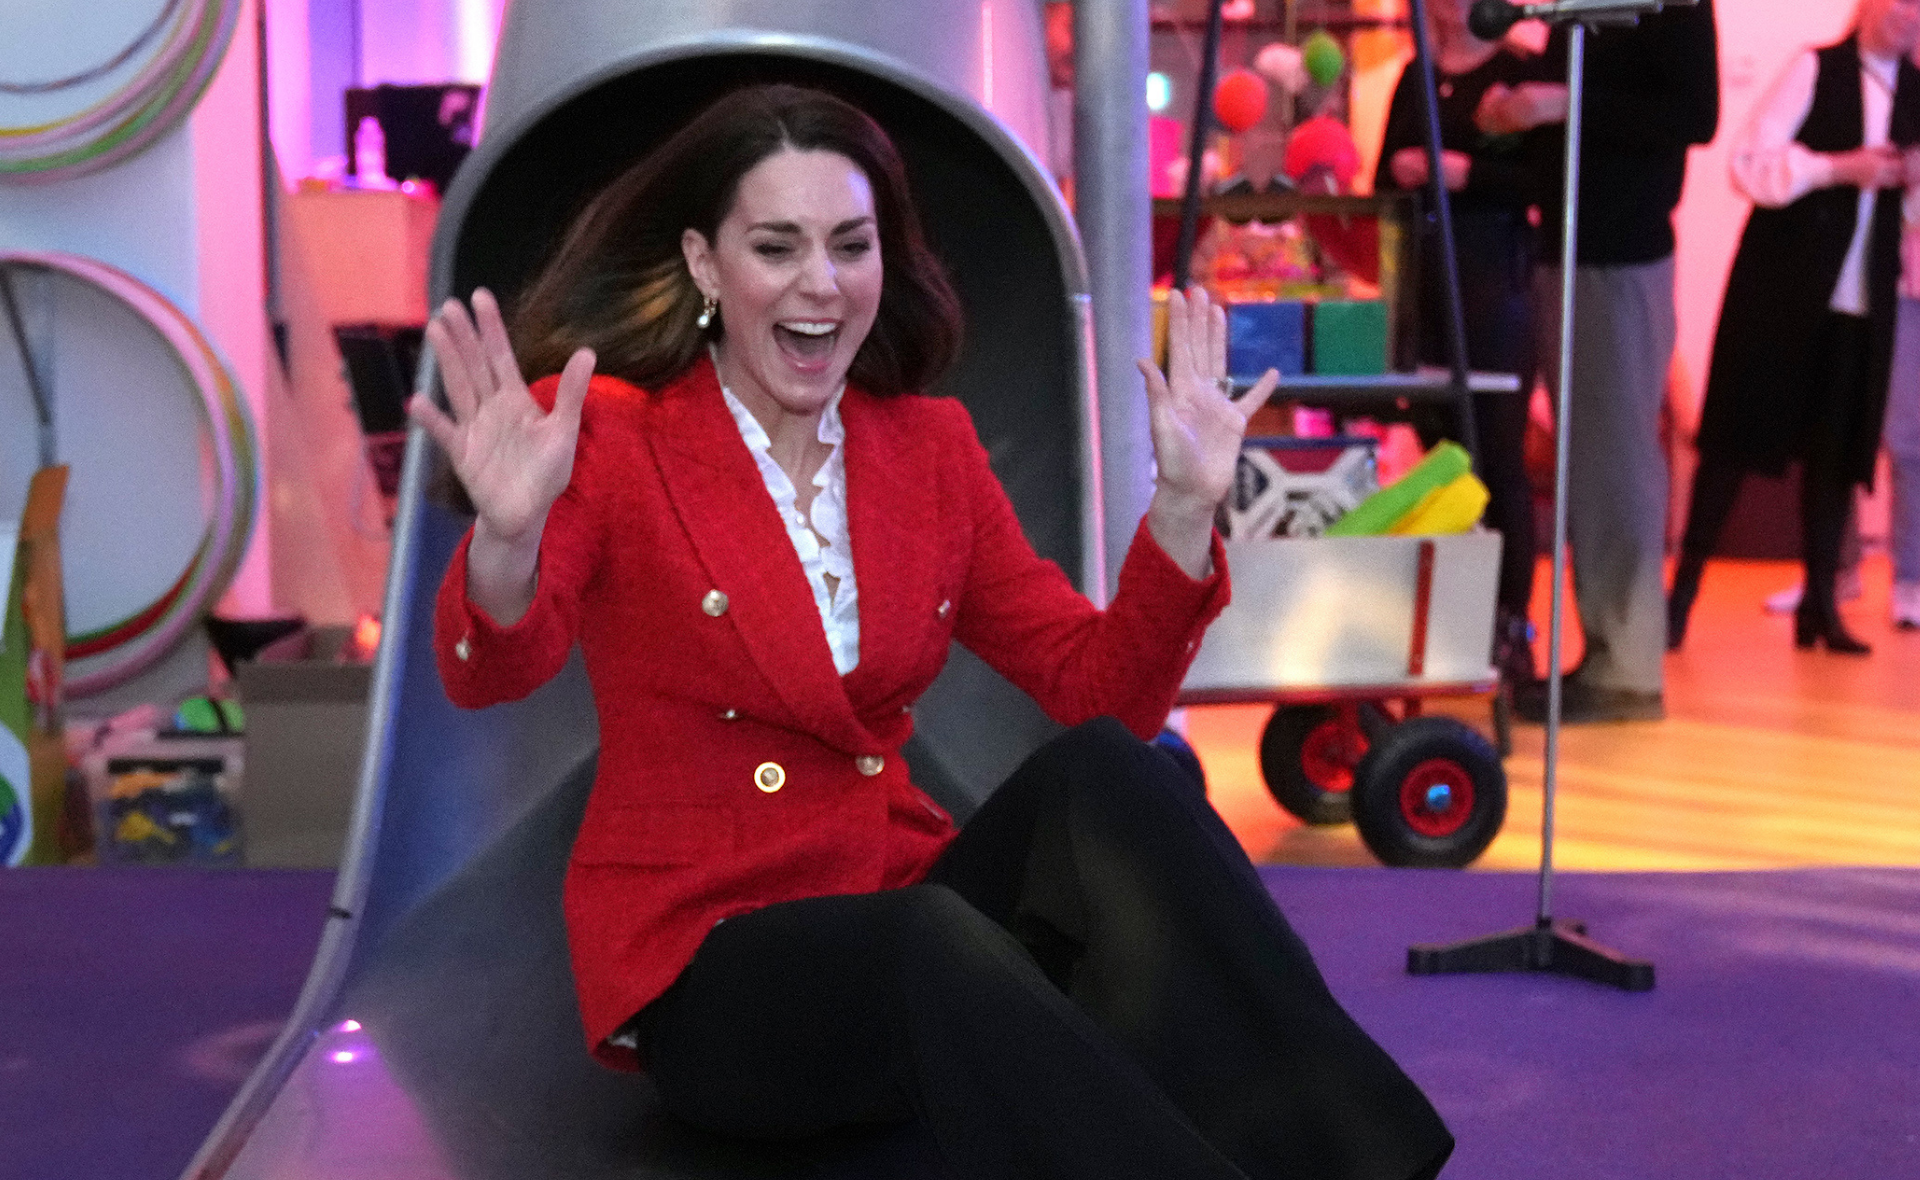 Catherine, Duchess of Cambridge steals the show in Denmark ahead of meeting with Crown Princess Mary